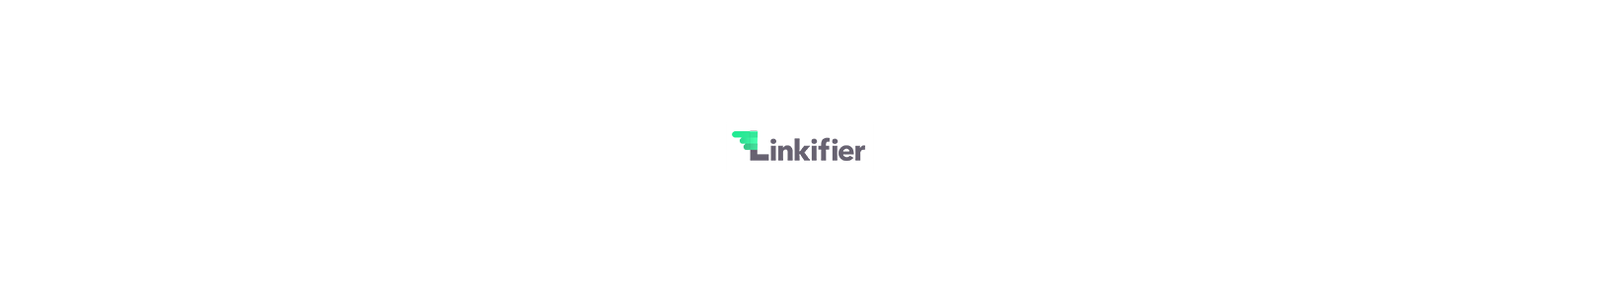 Linkifier cheap Premium Reseller In India